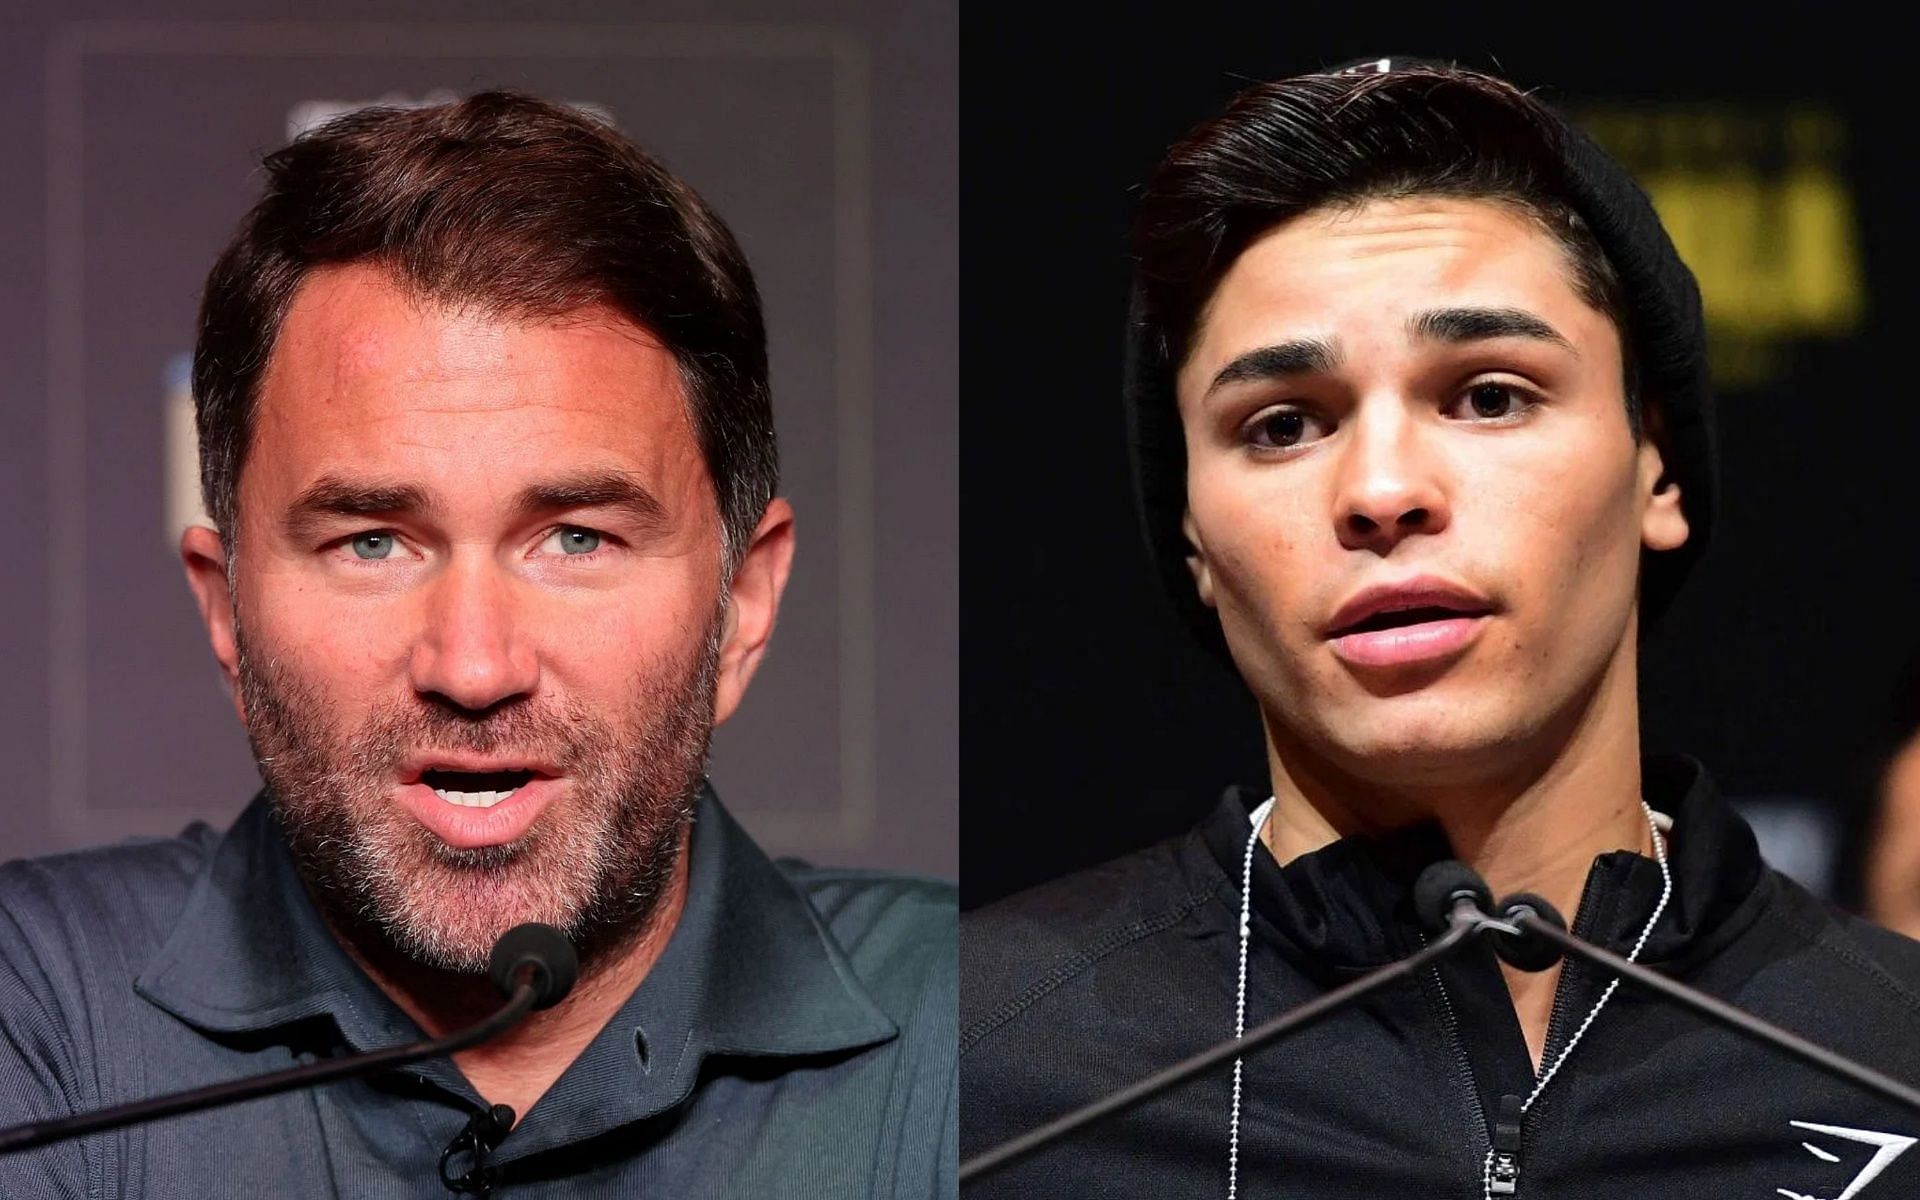 Ryan Garcia and Eddie Hearn got into it earlier today. [Images via Getty]